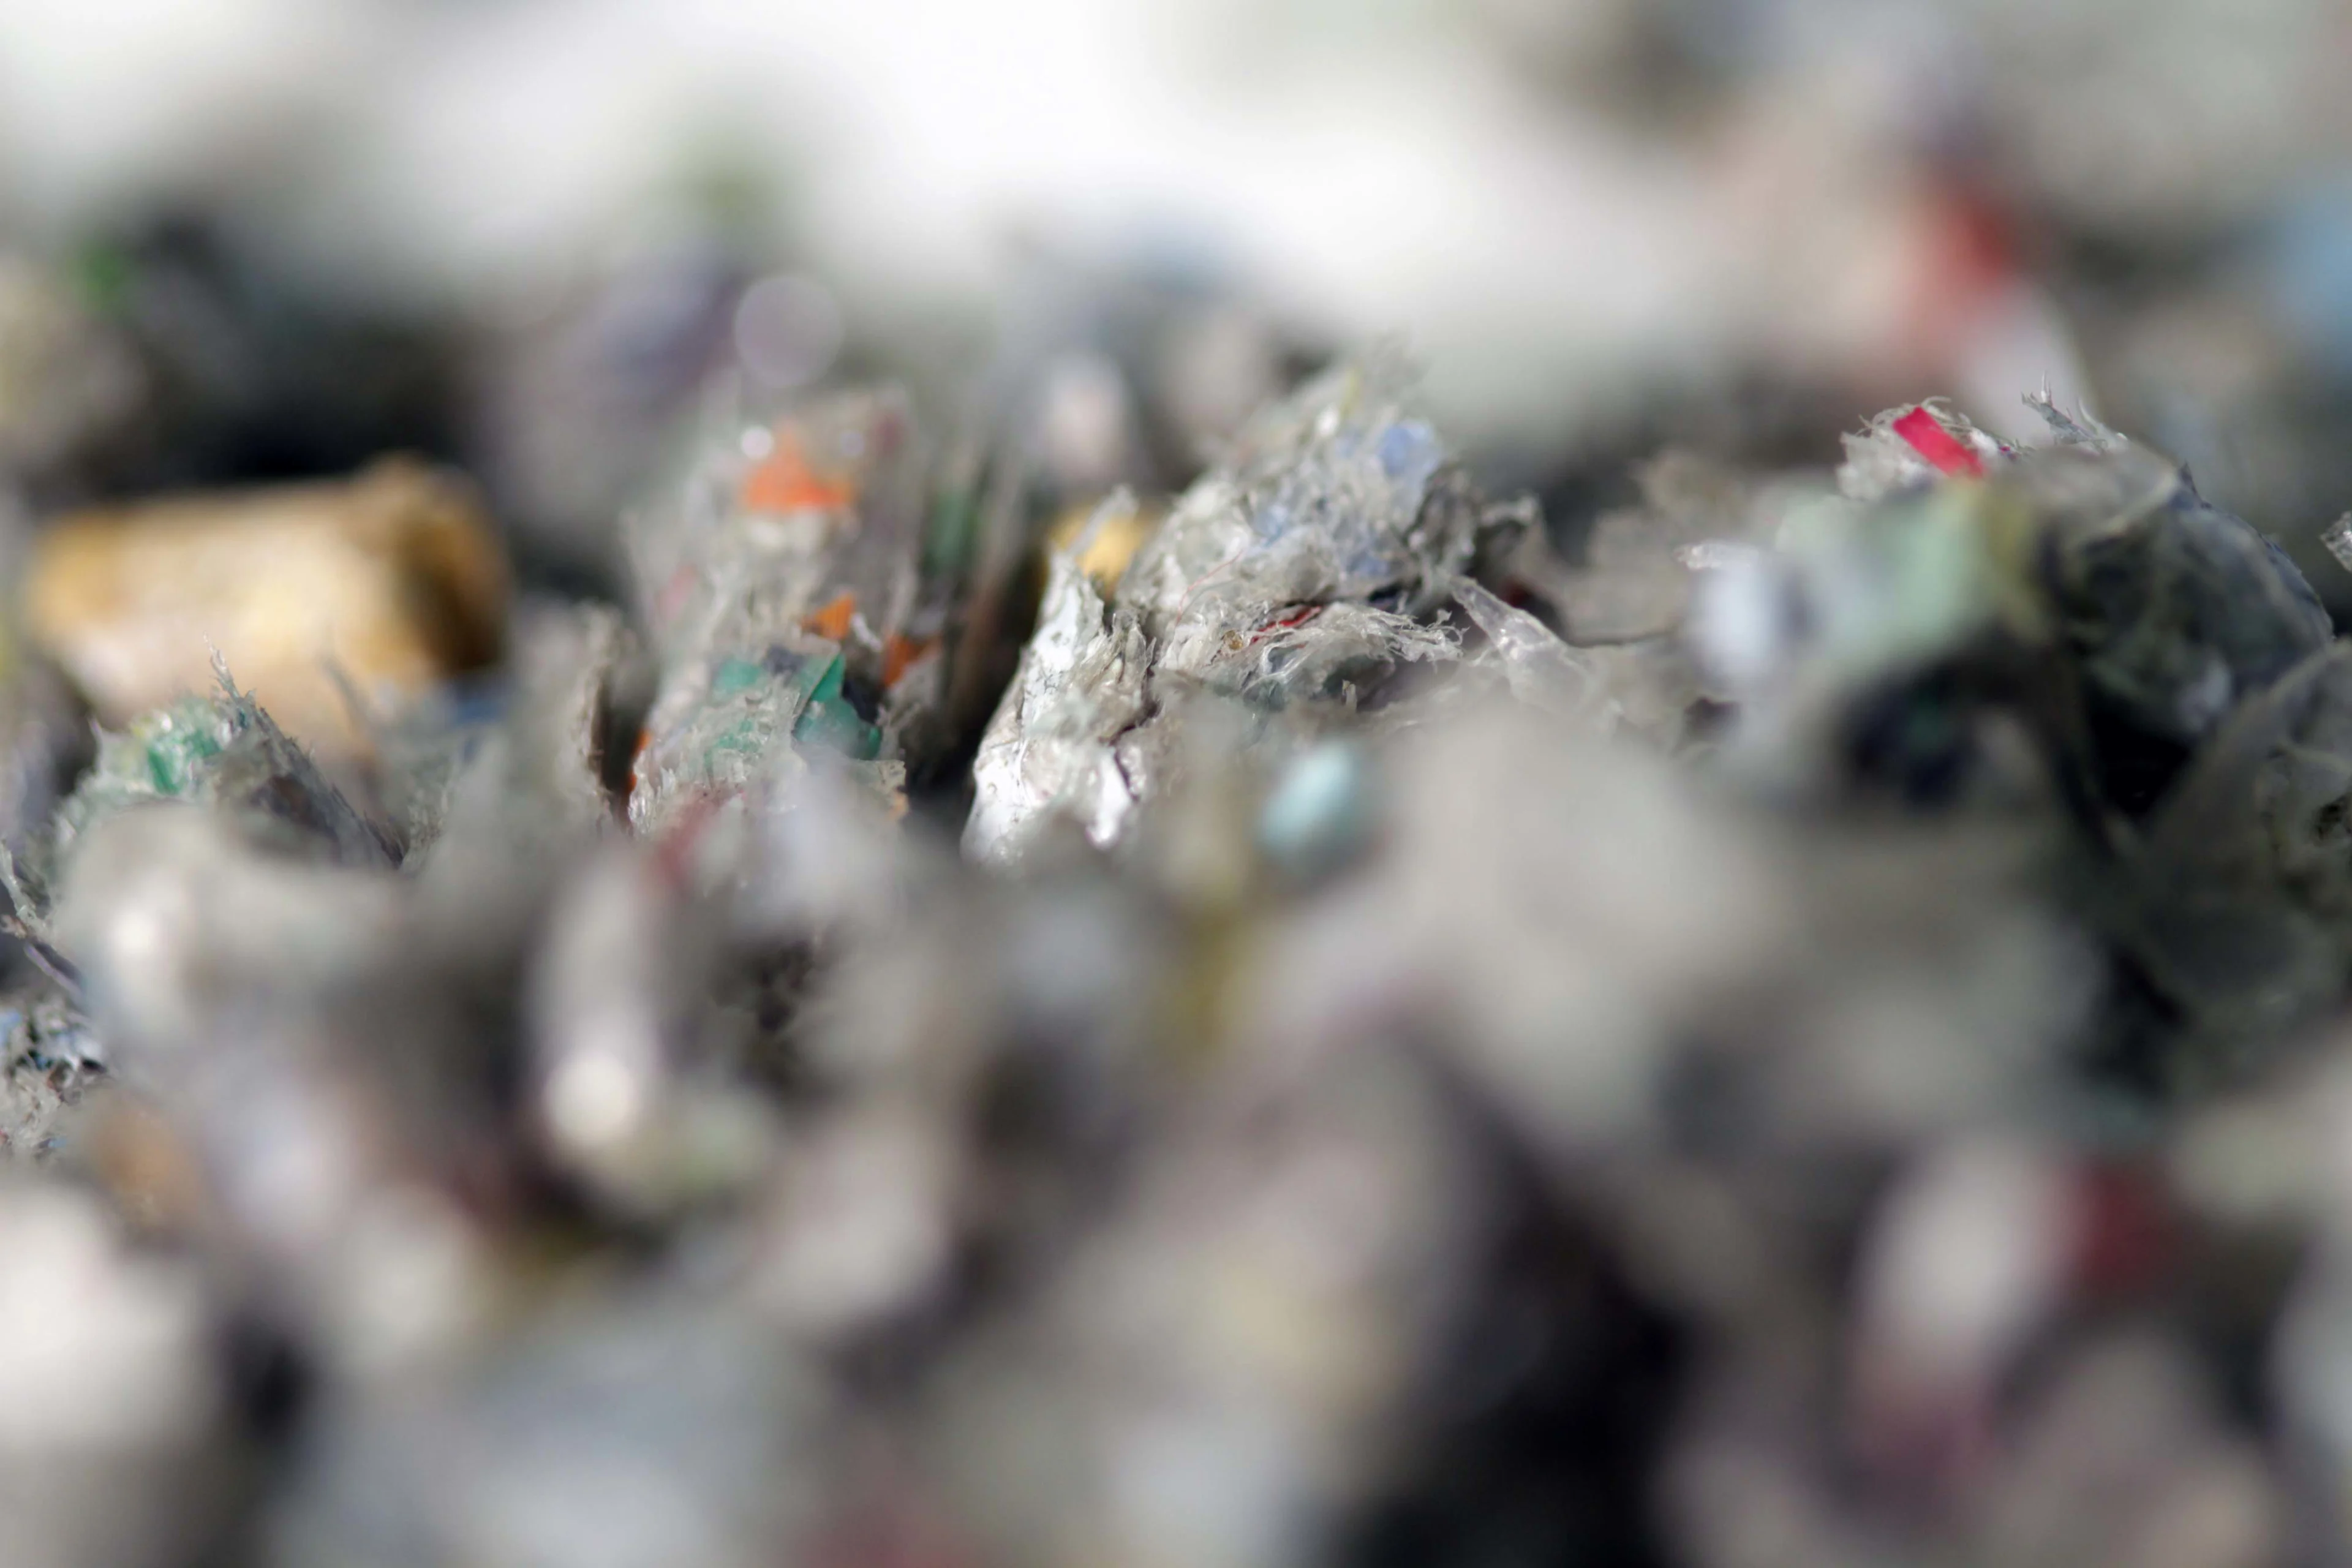 The end of waste as we know it? / Article by Neste